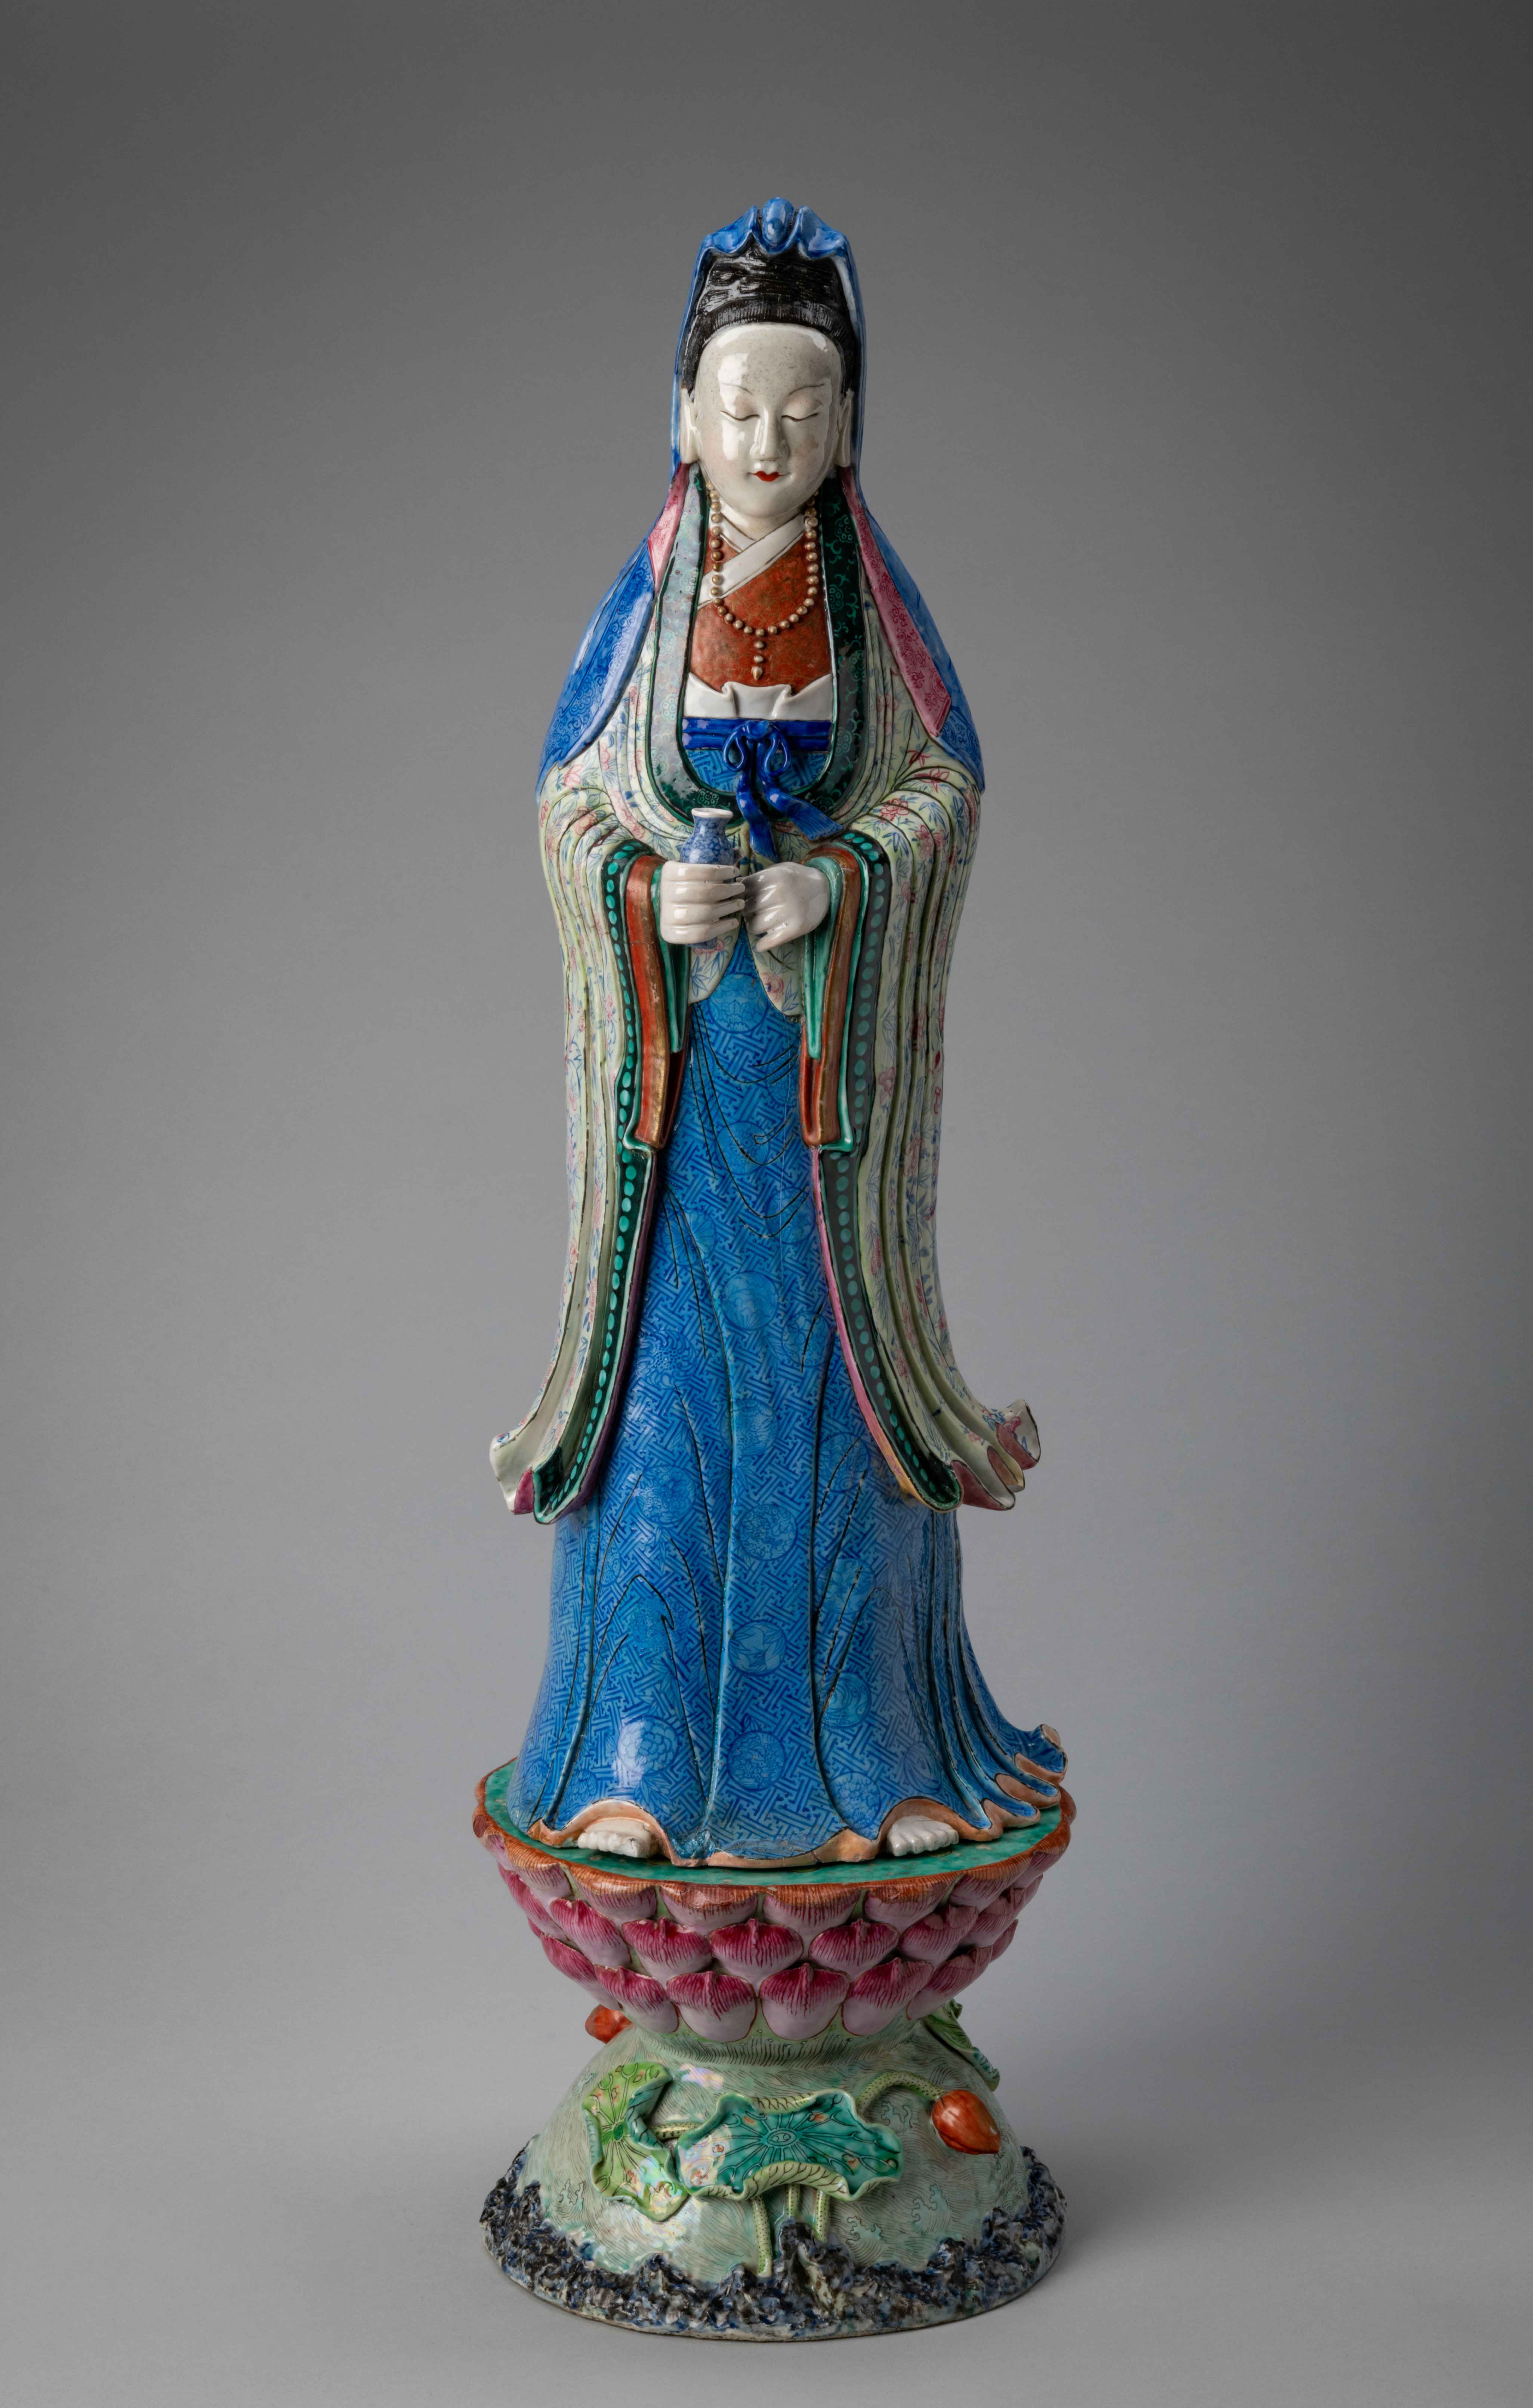 Guanyin, Bodhisattva of Compassion, about 1796–1820, China, Qing dynasty (1644–1911), Jiaqing reign (1796–1820), enamel and gold on porcelain, 33 x 9 3/4 x 8 7/16 in. (83.82 x 24.77 x 21.43 cm). Taft Museum of Art, Cincinnati, Ohio. Bequest of Charles Phelps Taft and Anna Sinton Taft, 1931.168